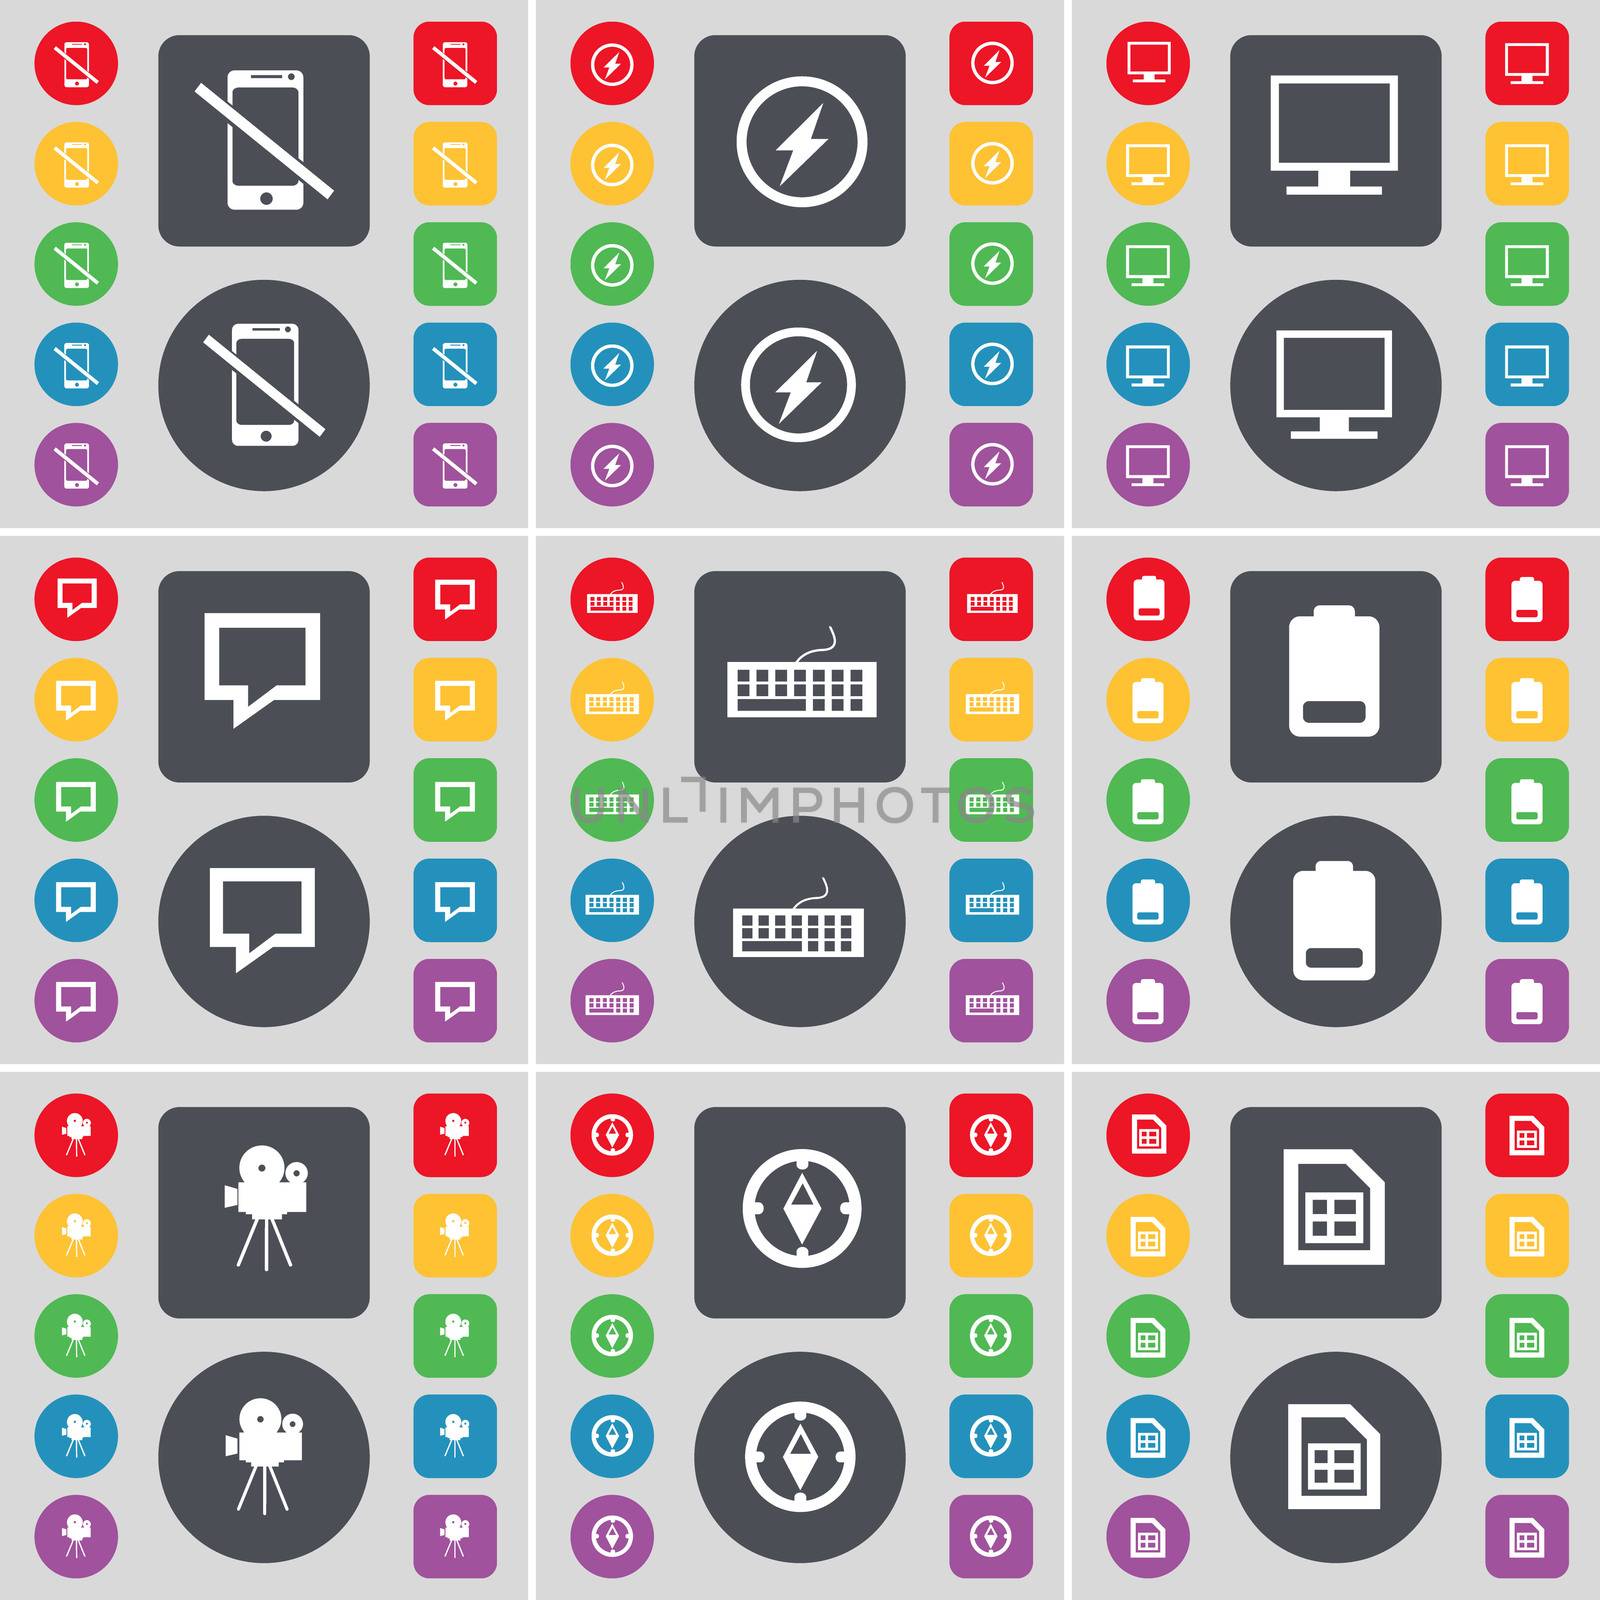 Smartphone, Flash, Monitor, Chat bubble, Keyboard, Battery, Film camera, Compass, File icon symbol. A large set of flat, colored buttons for your design. illustration